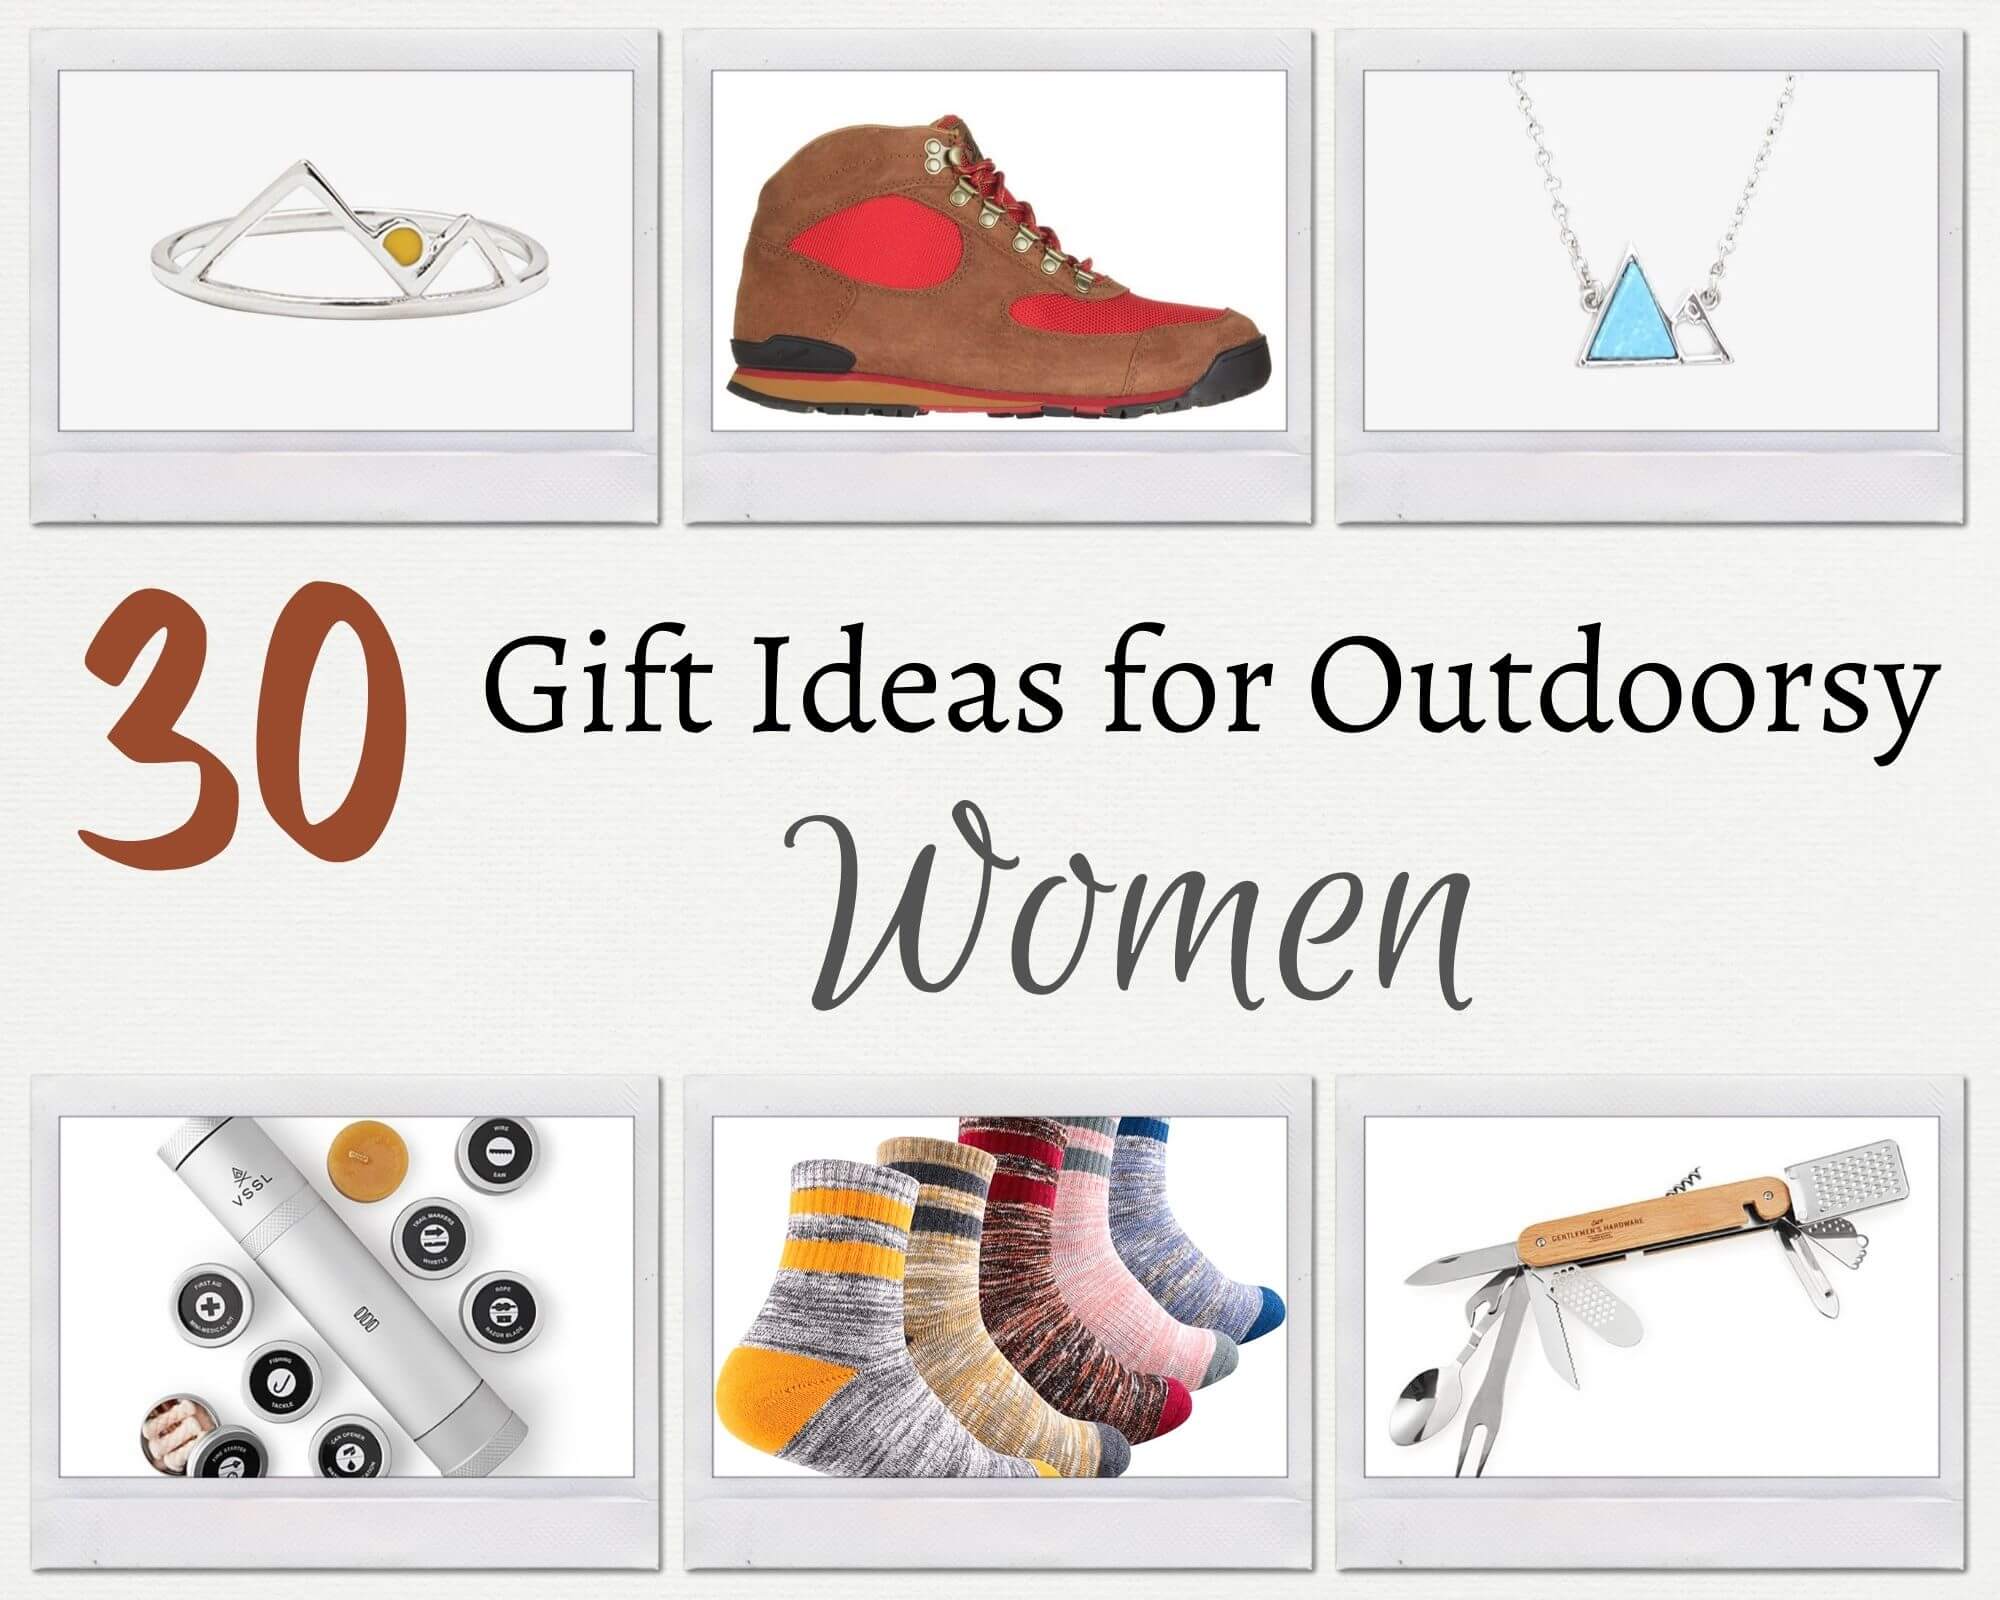 Gift ideas for outdoors women